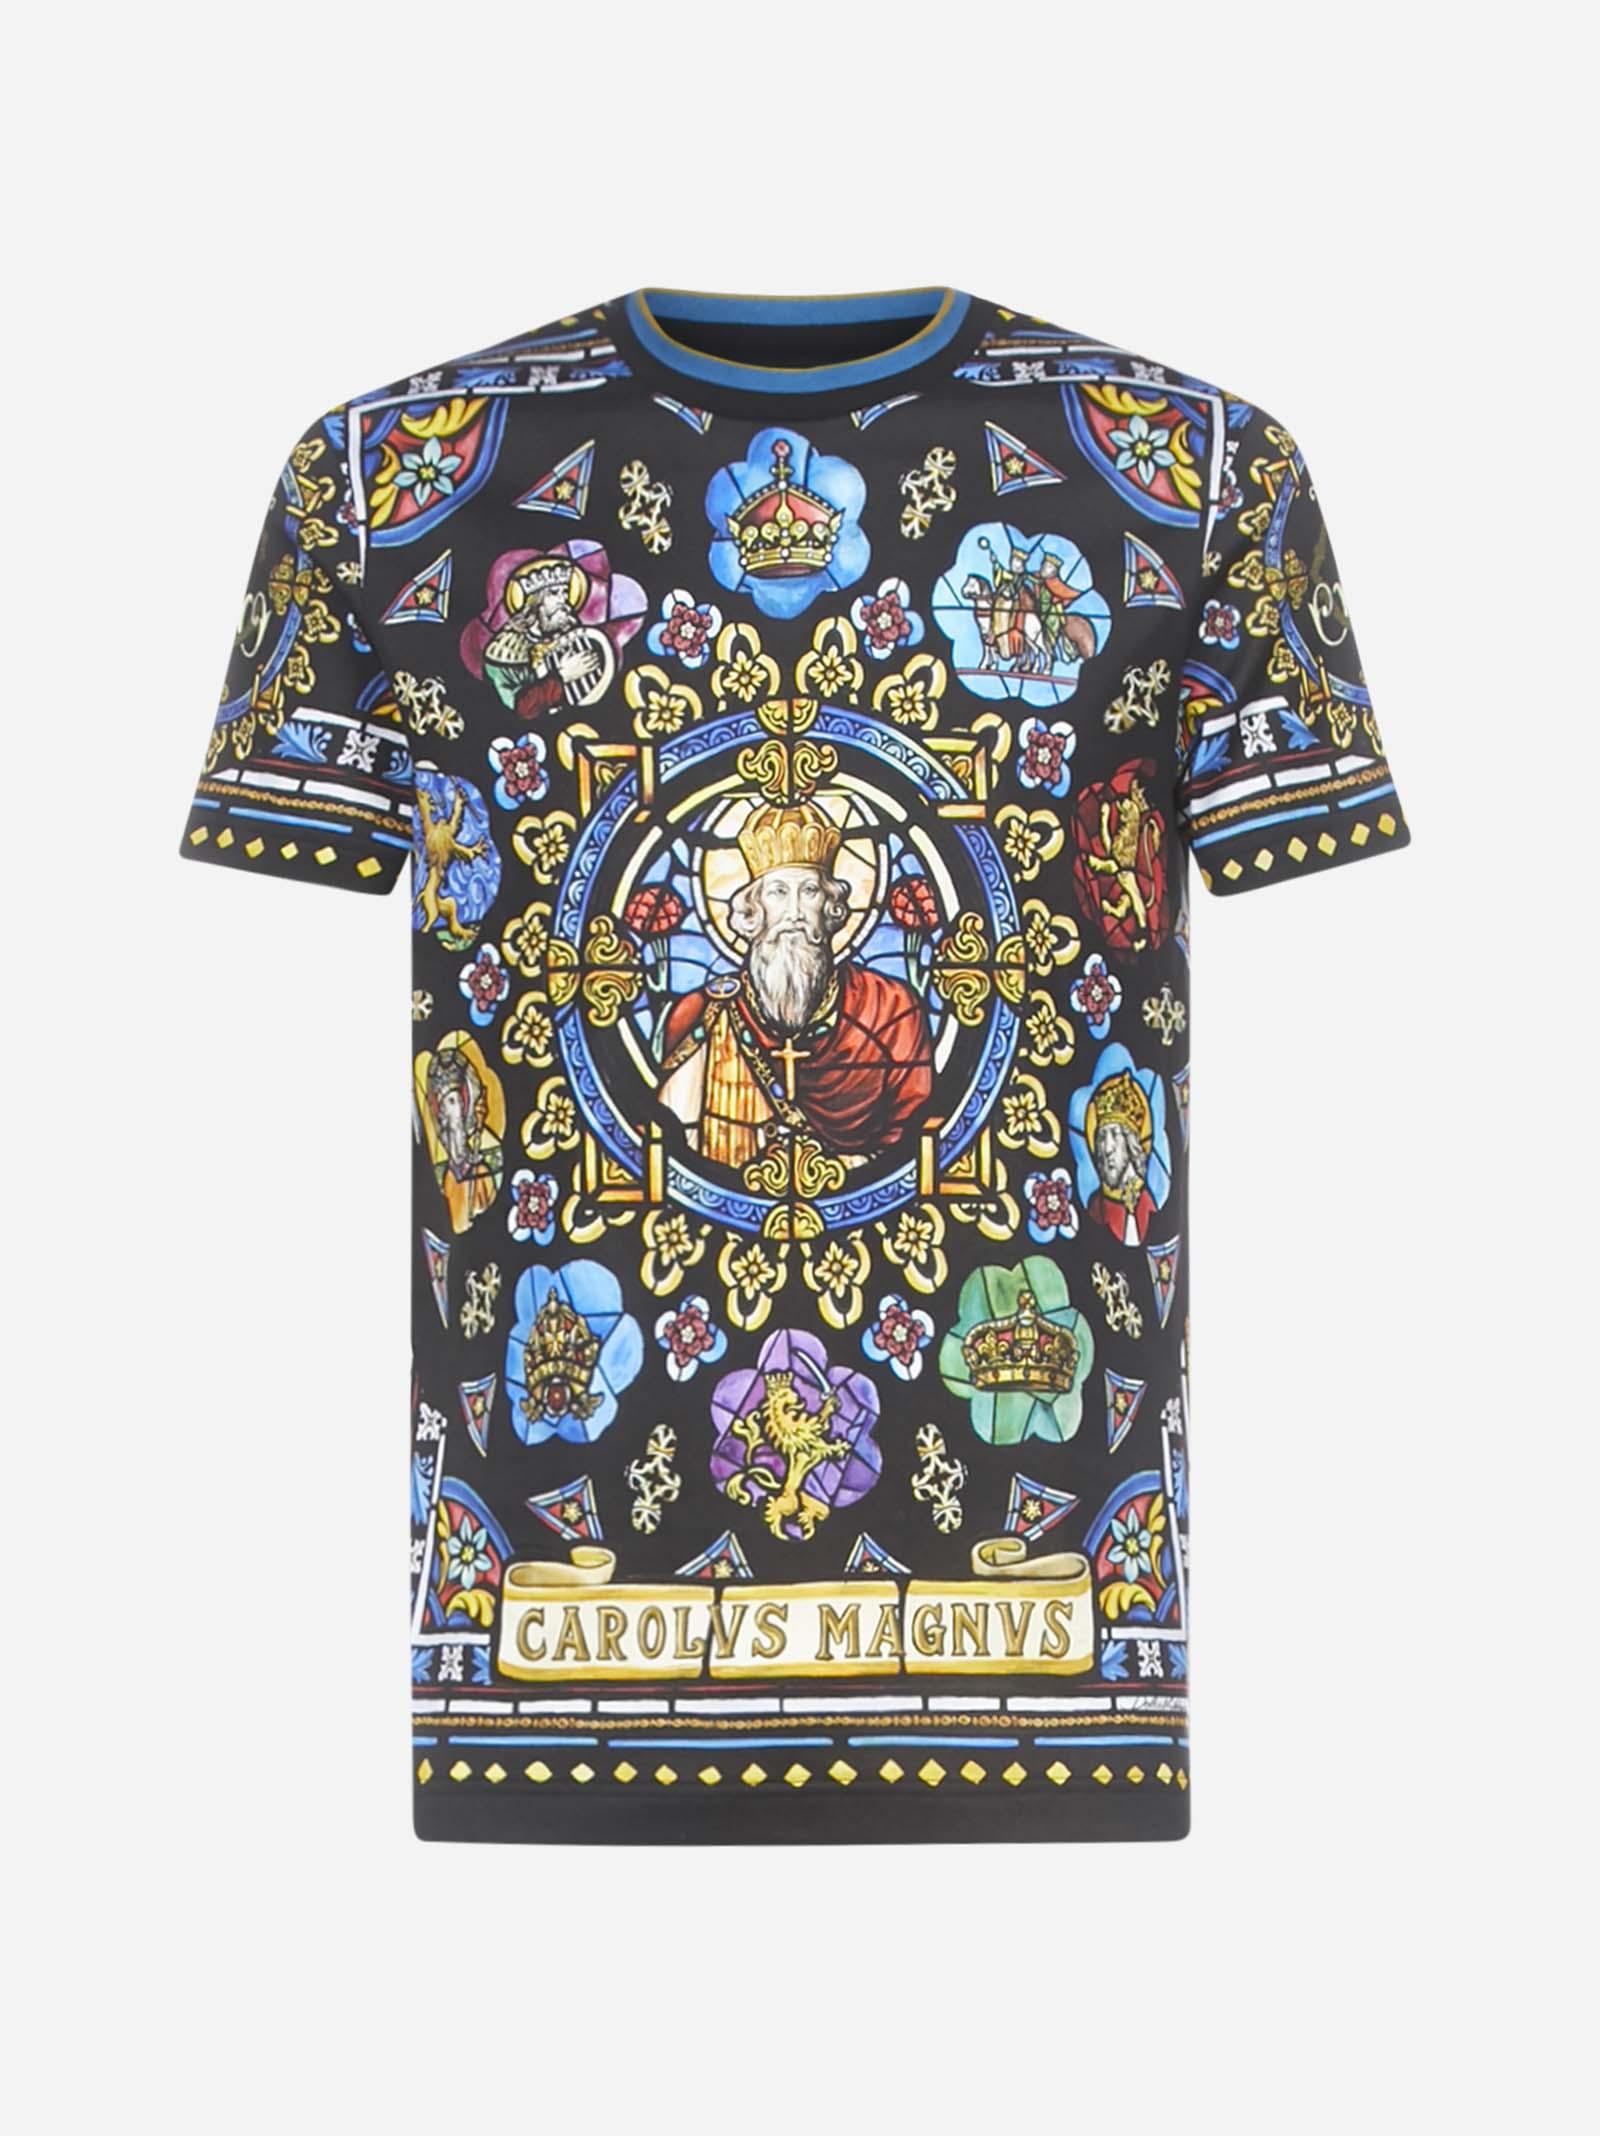 Dolce & Gabbana Carlo Magno Print Cotton T-shirt in Blue for Men - Lyst